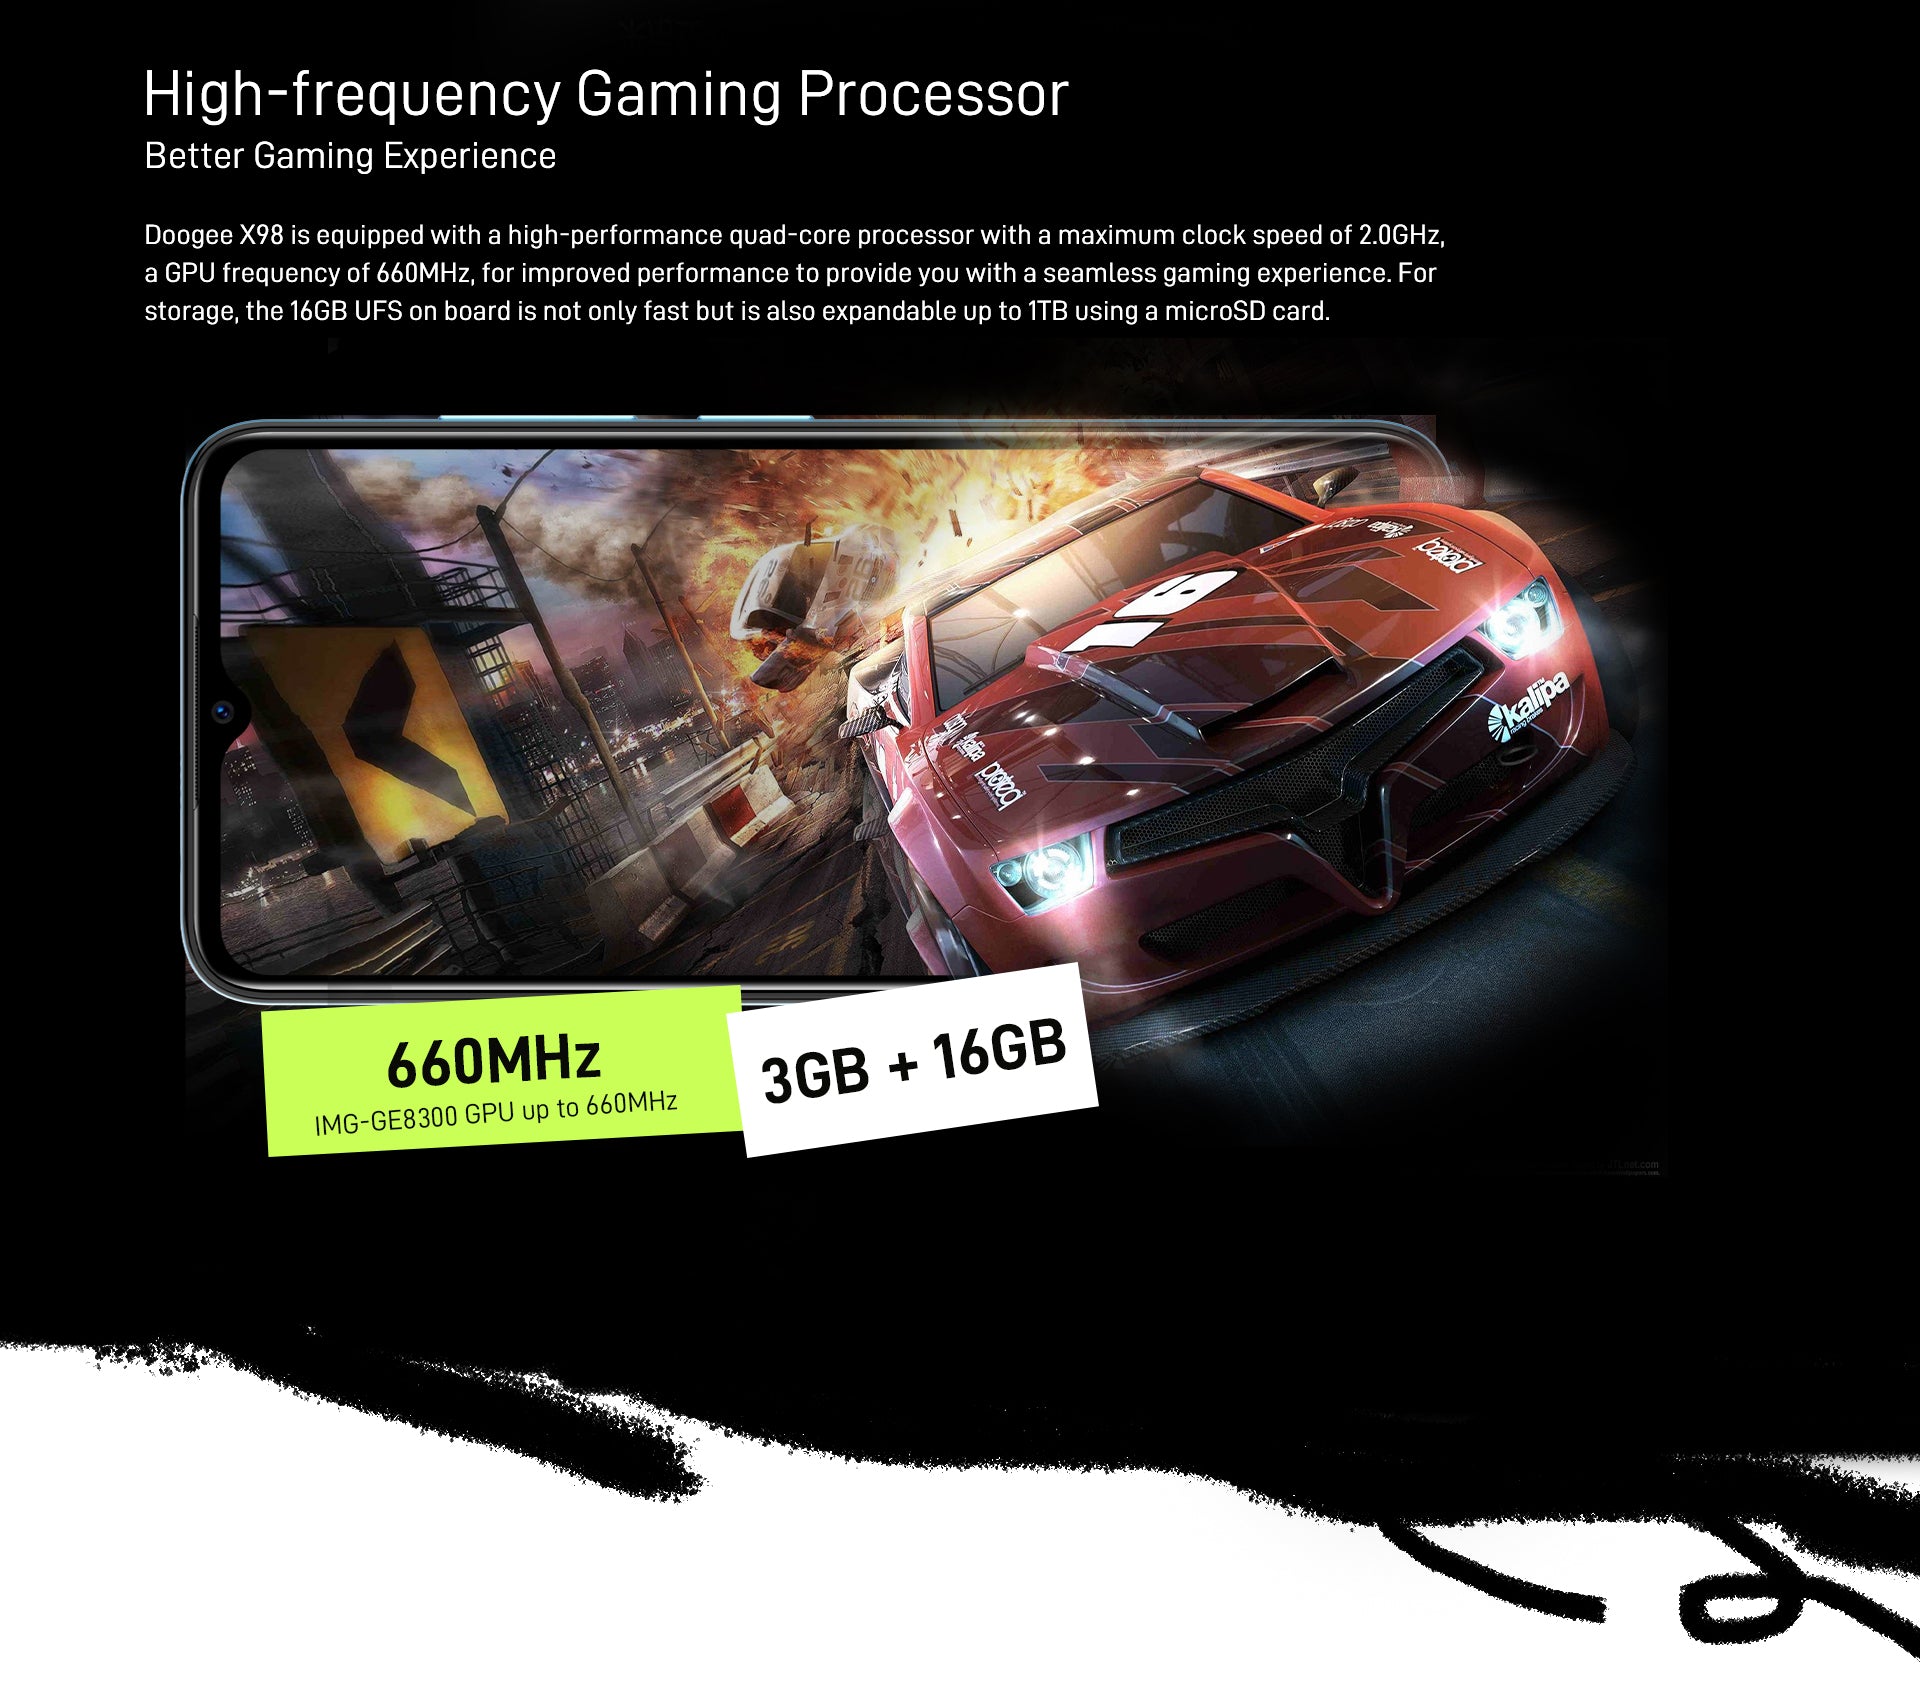 High-frequency Gaming Processor Doogee X98 is equipped with a high-performance quad-core processor with a maximum clock speed of 2.0GHz, a GPU frequency of 660MHz, for improved performance to provide you with a seamless gaming experience. For storage, the 16GB UFS on board is not only fast but is also expandable up to 1TB using a microSD card.  IMG-GE8300 GPU up to 660MHz      |     3GB RAM + 16GB ROM